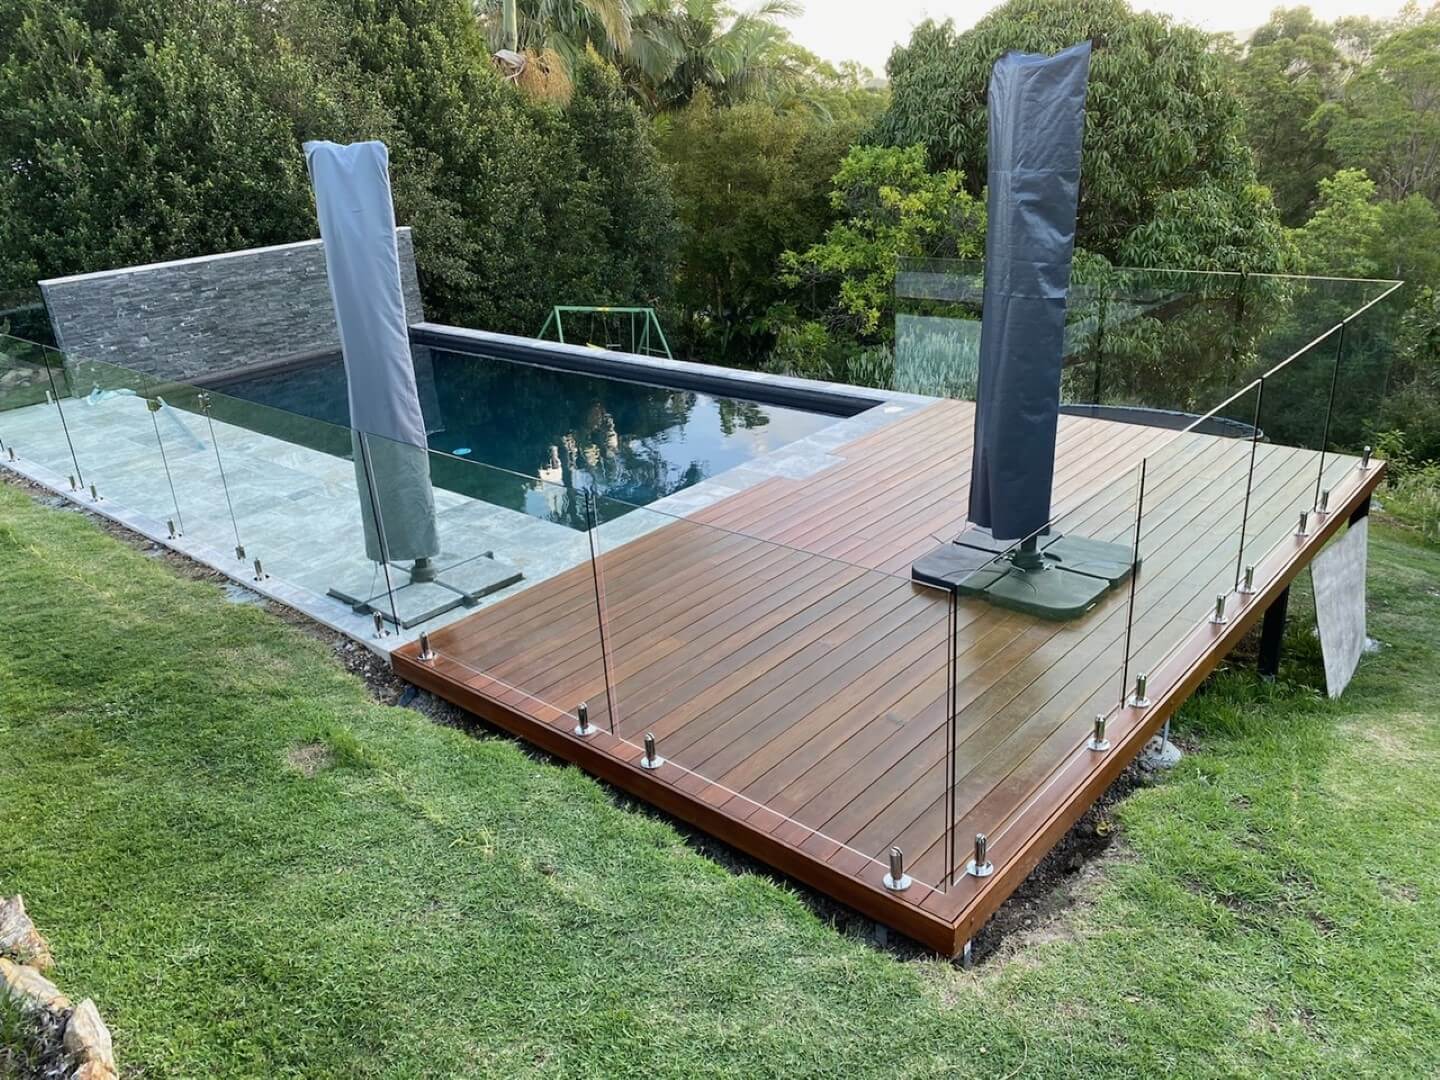 Pool Surrounds with Decking and Glass Pool Fencing